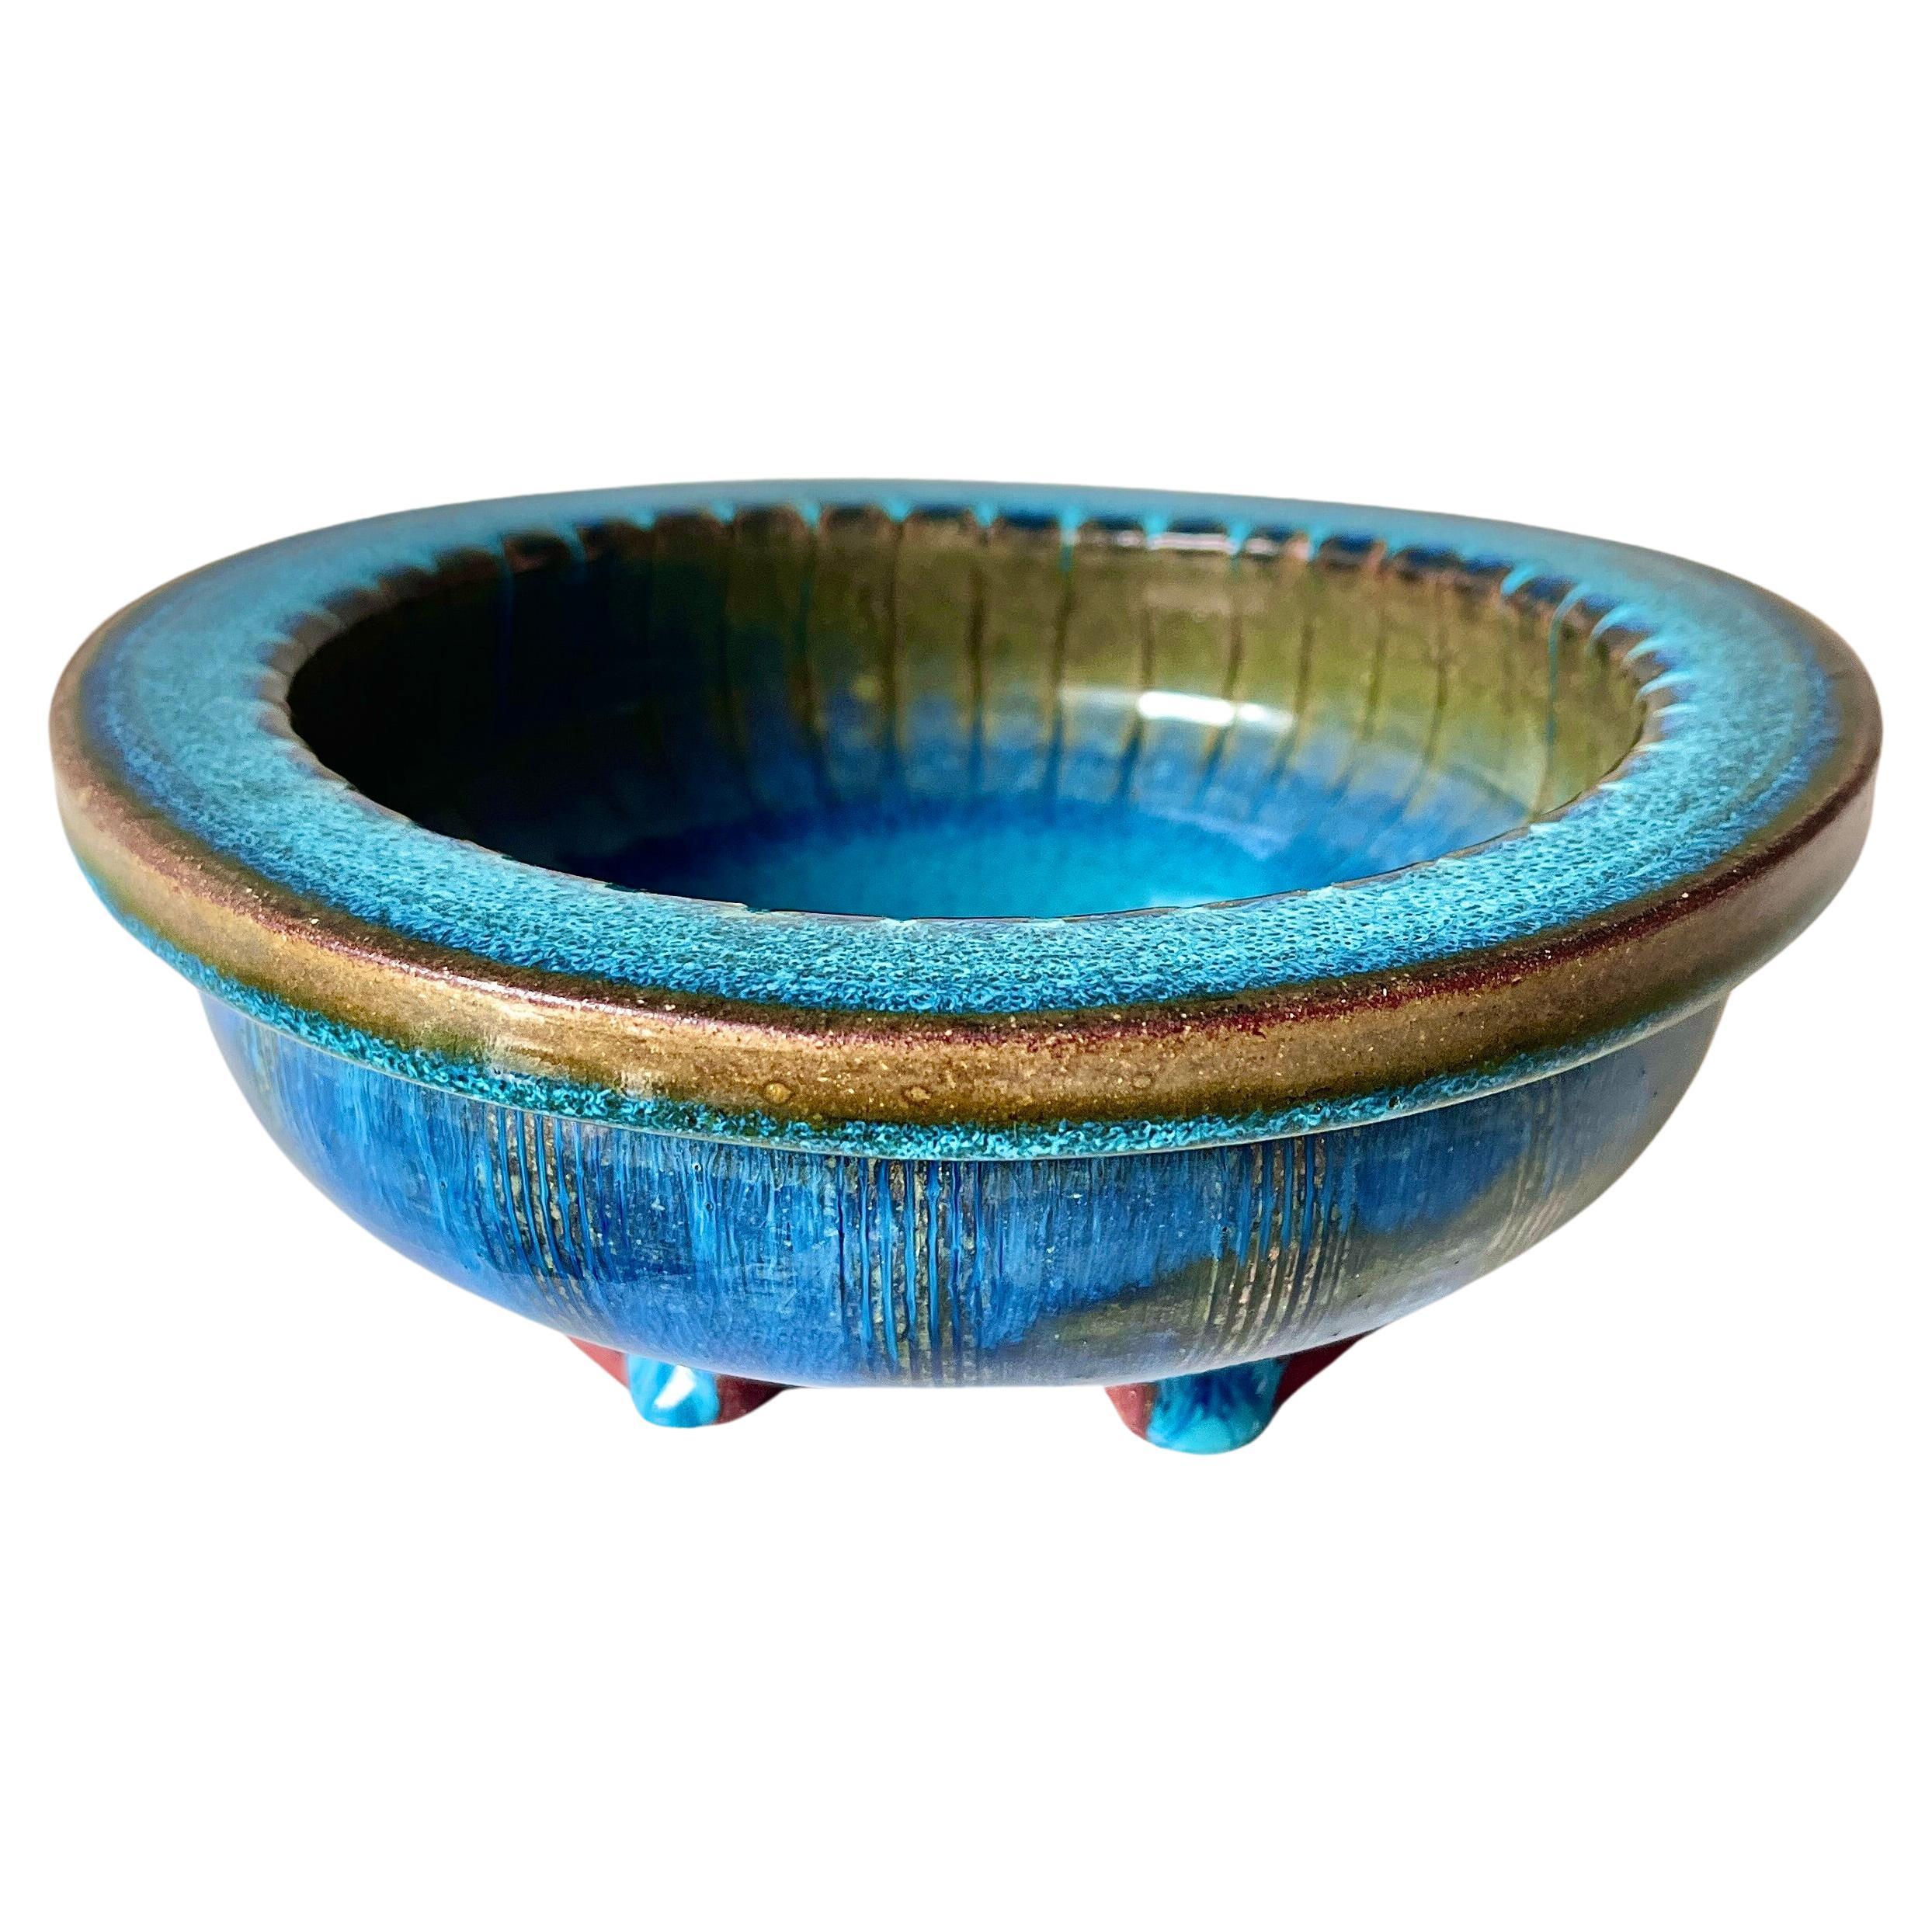 Striking unique stoneware bowl designed by Wilhelm Kåge from the ‘Farsta’ series for Gustavsberg, Sweden, 1952. Vibrant blue hare’s fur glaze with an exposed base creates a dramatic contrast typical for Kåge’s Farsta pieces.

Impressed at the base